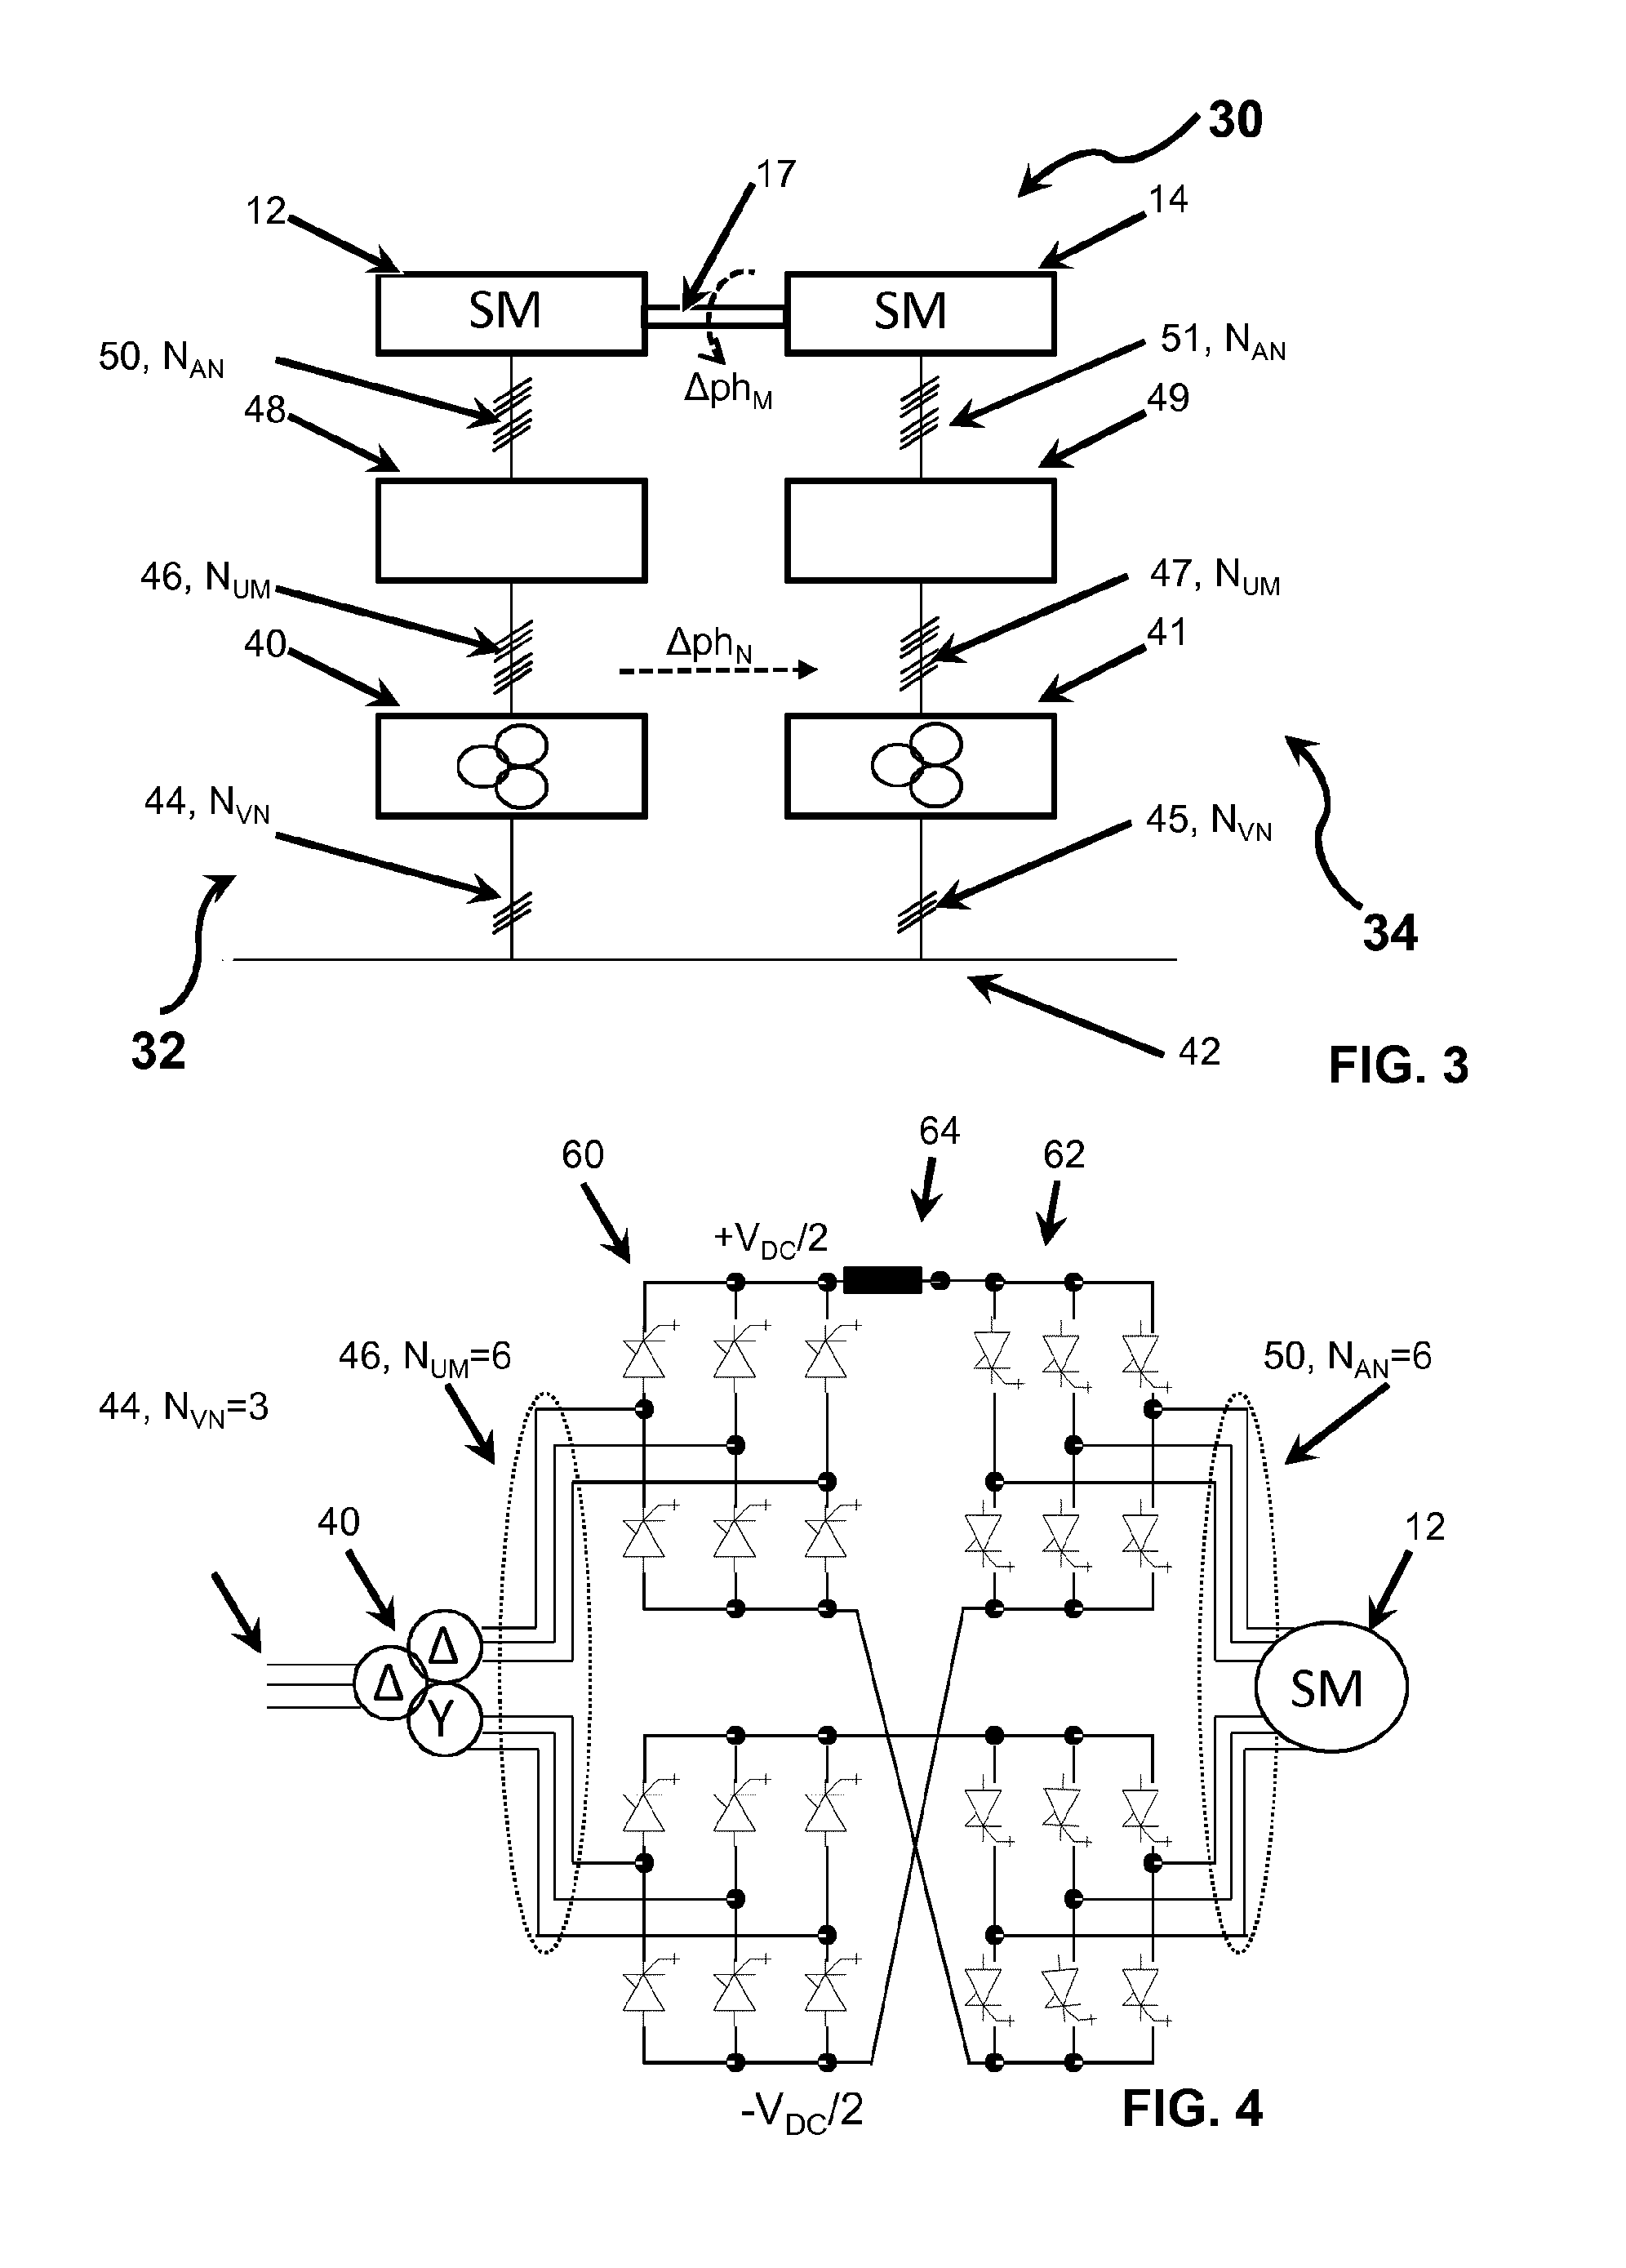 System having a first electric motor and a second electric motor for driving a string